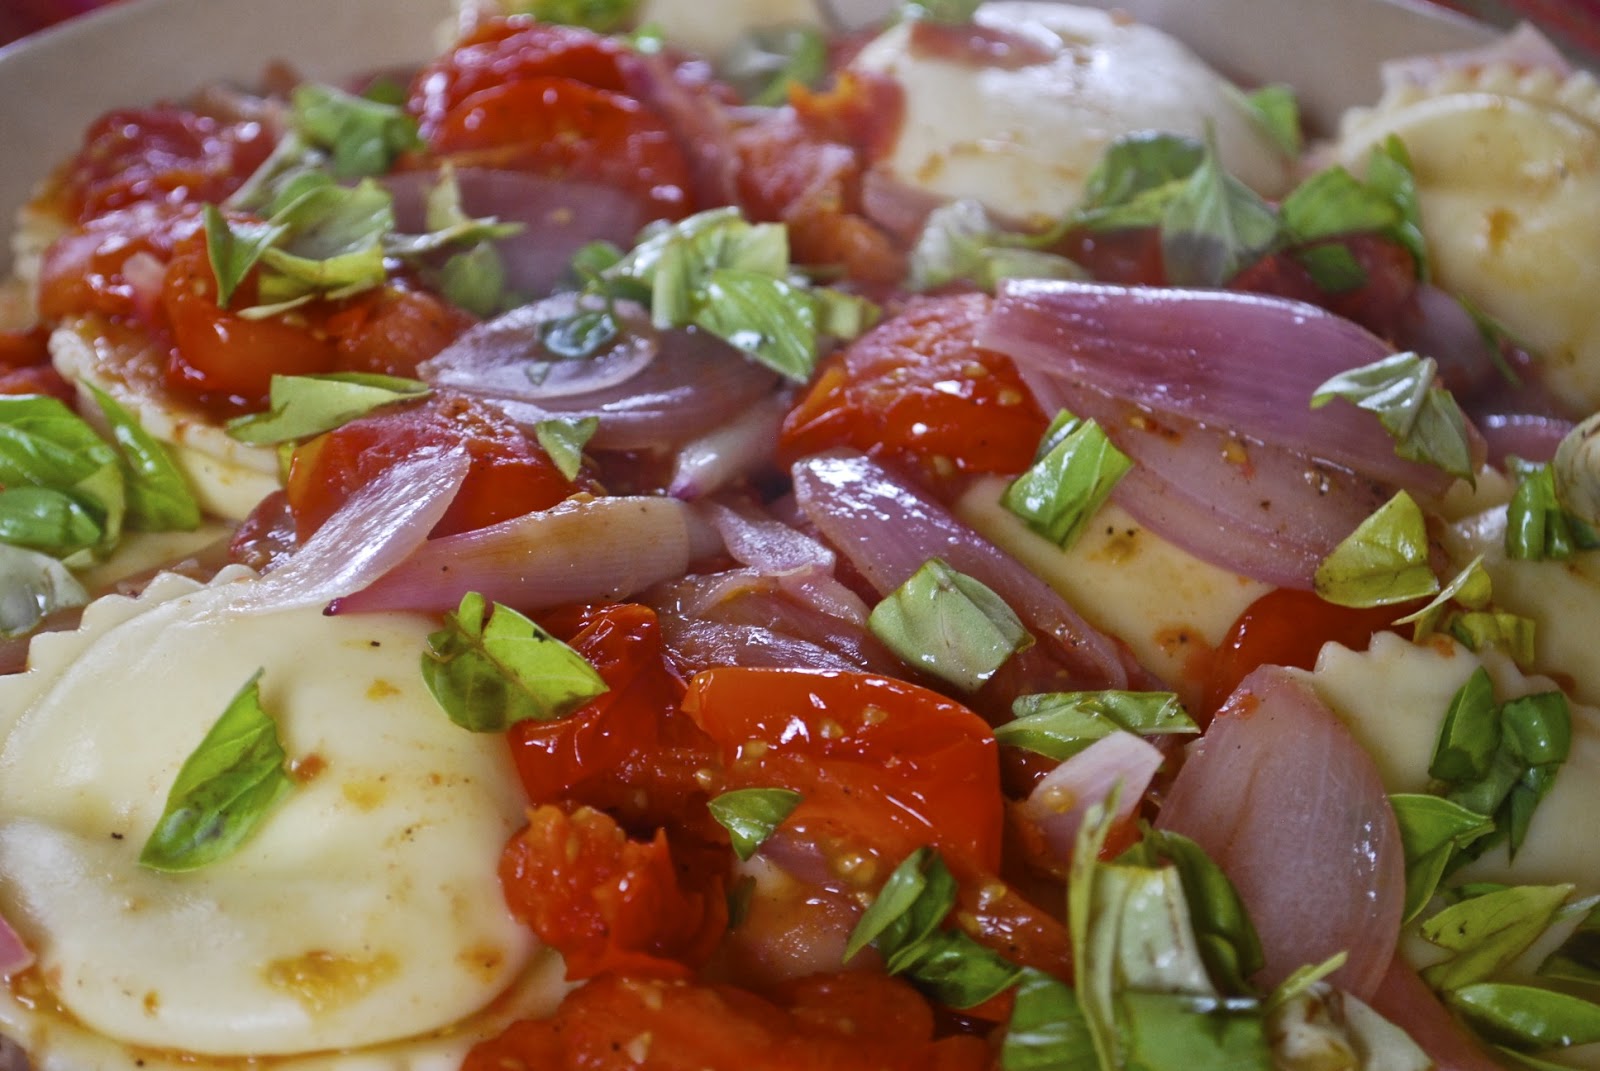 quot;Pointlessquot; Meals: Ravioli with a Fresh tomato, Shallot Sauce